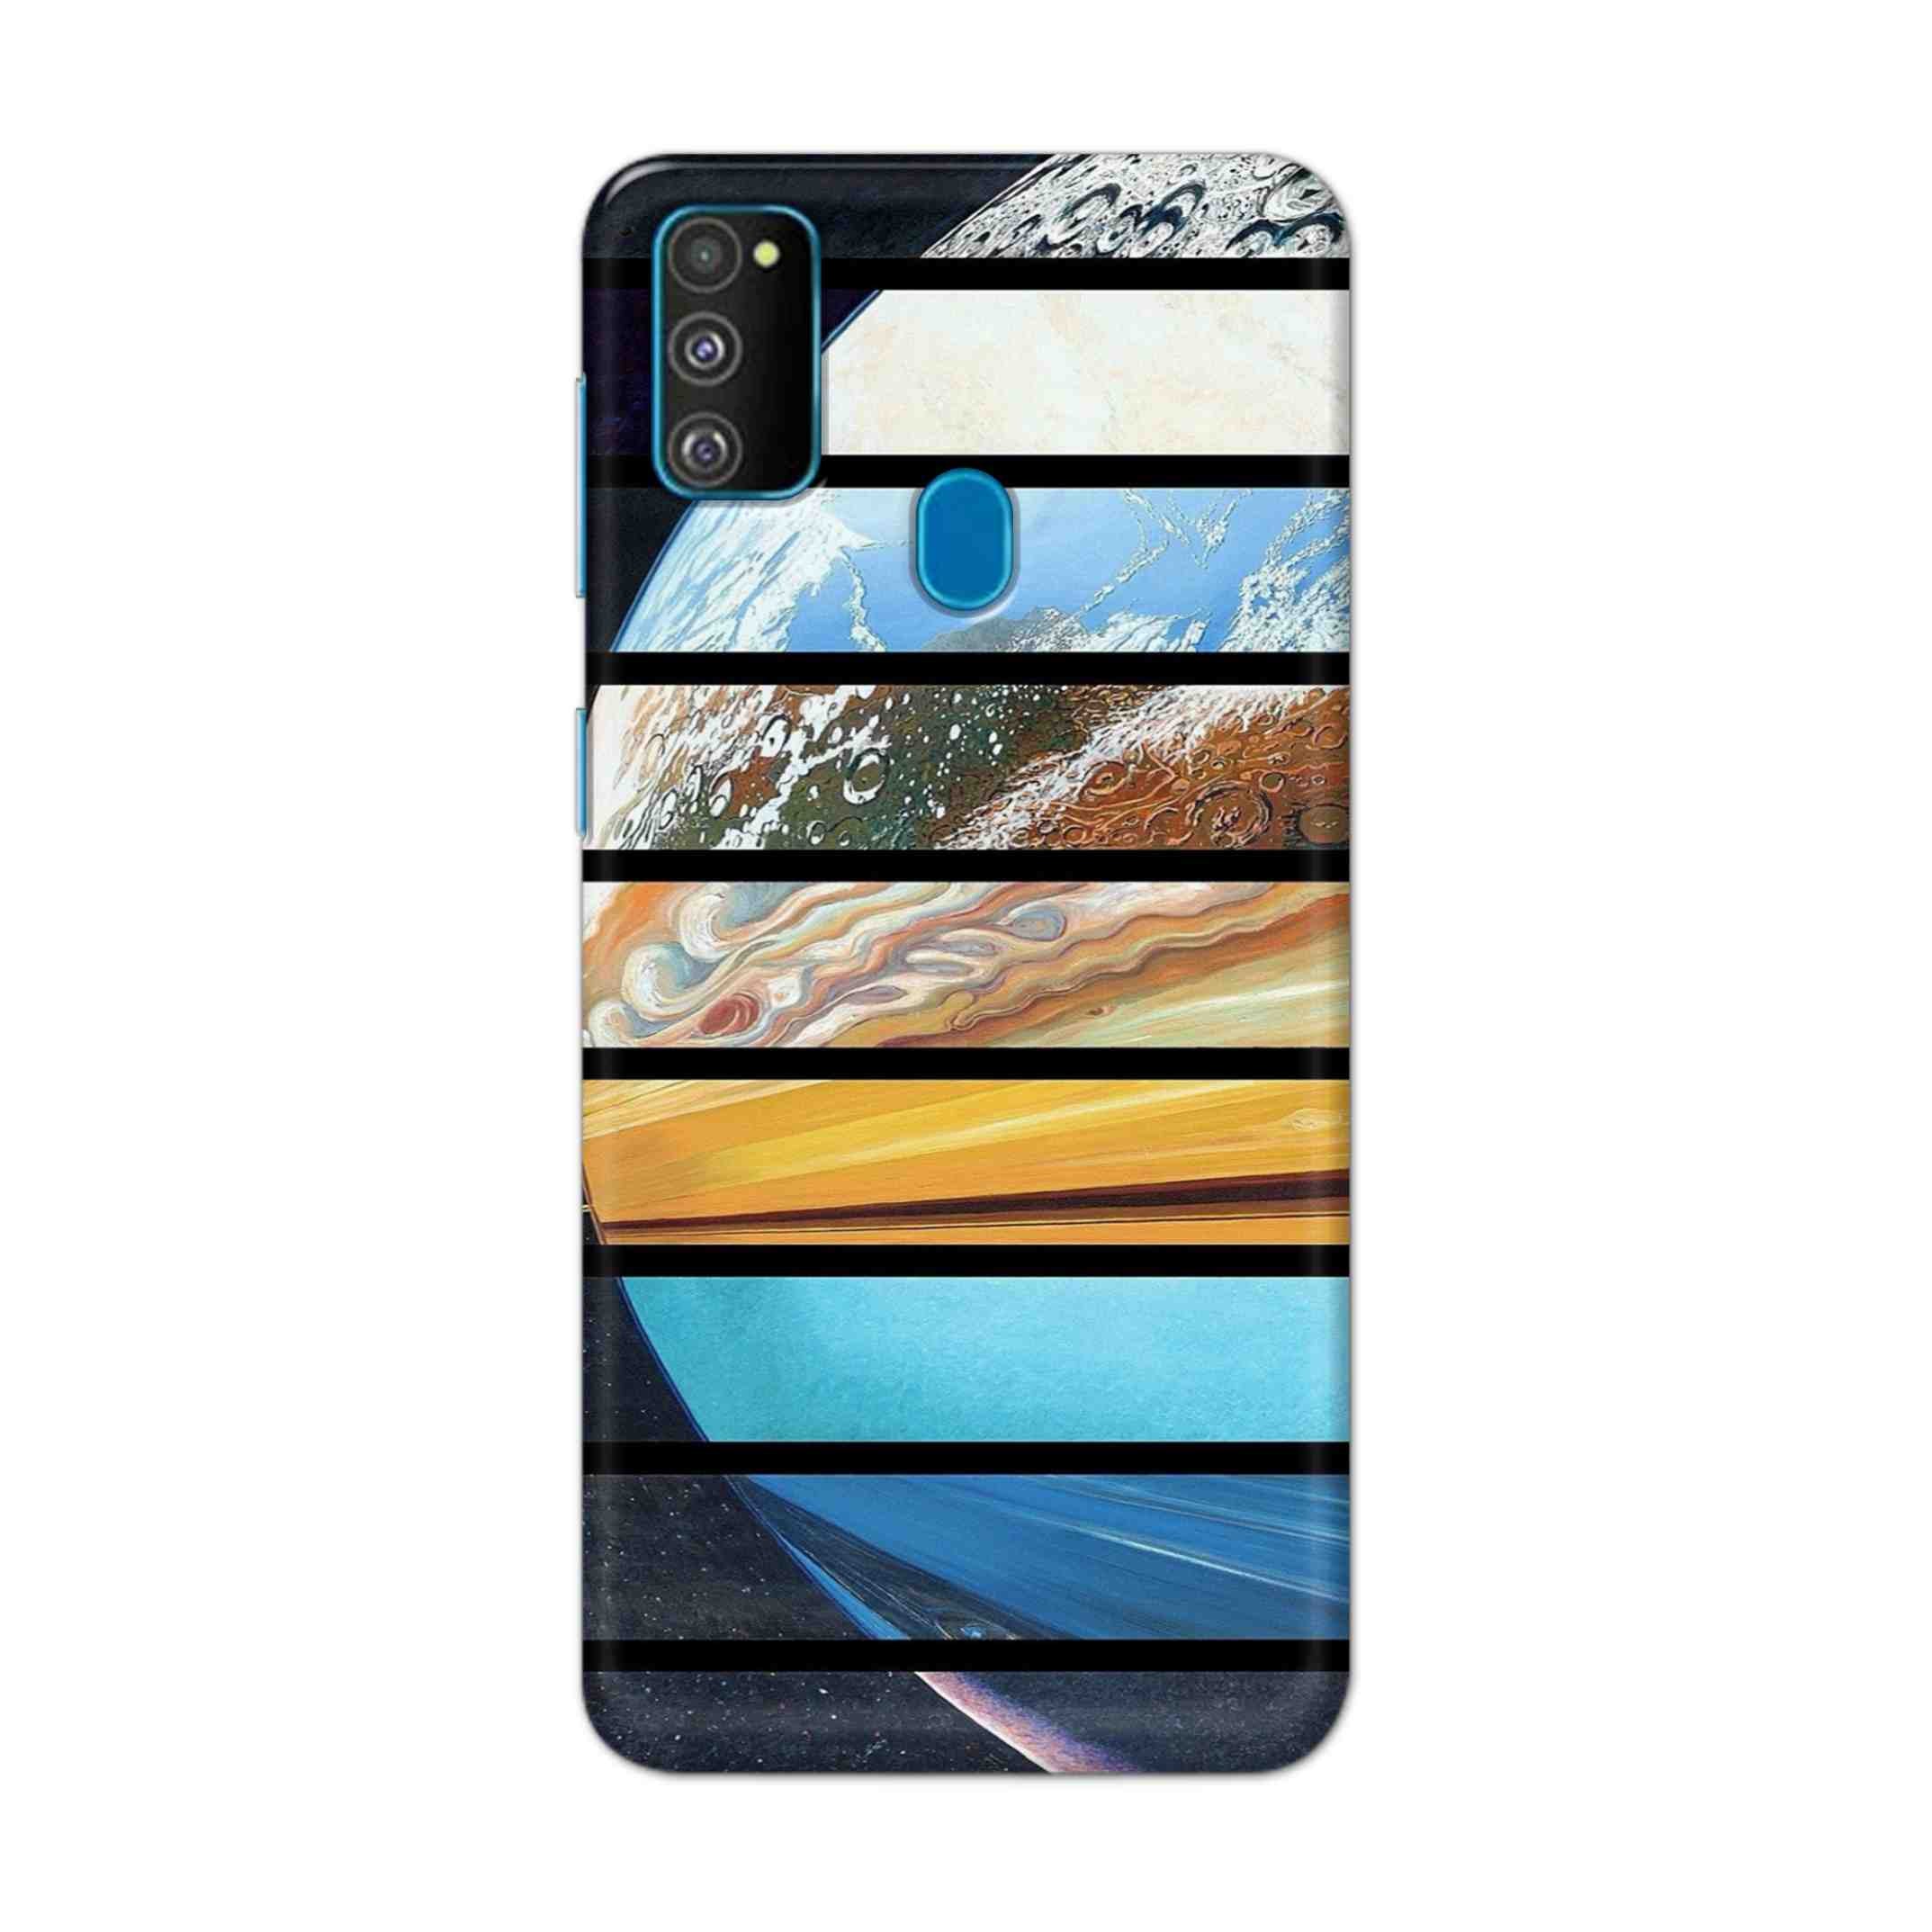 Buy Colourful Earth Hard Back Mobile Phone Case Cover For Samsung Galaxy M30s Online